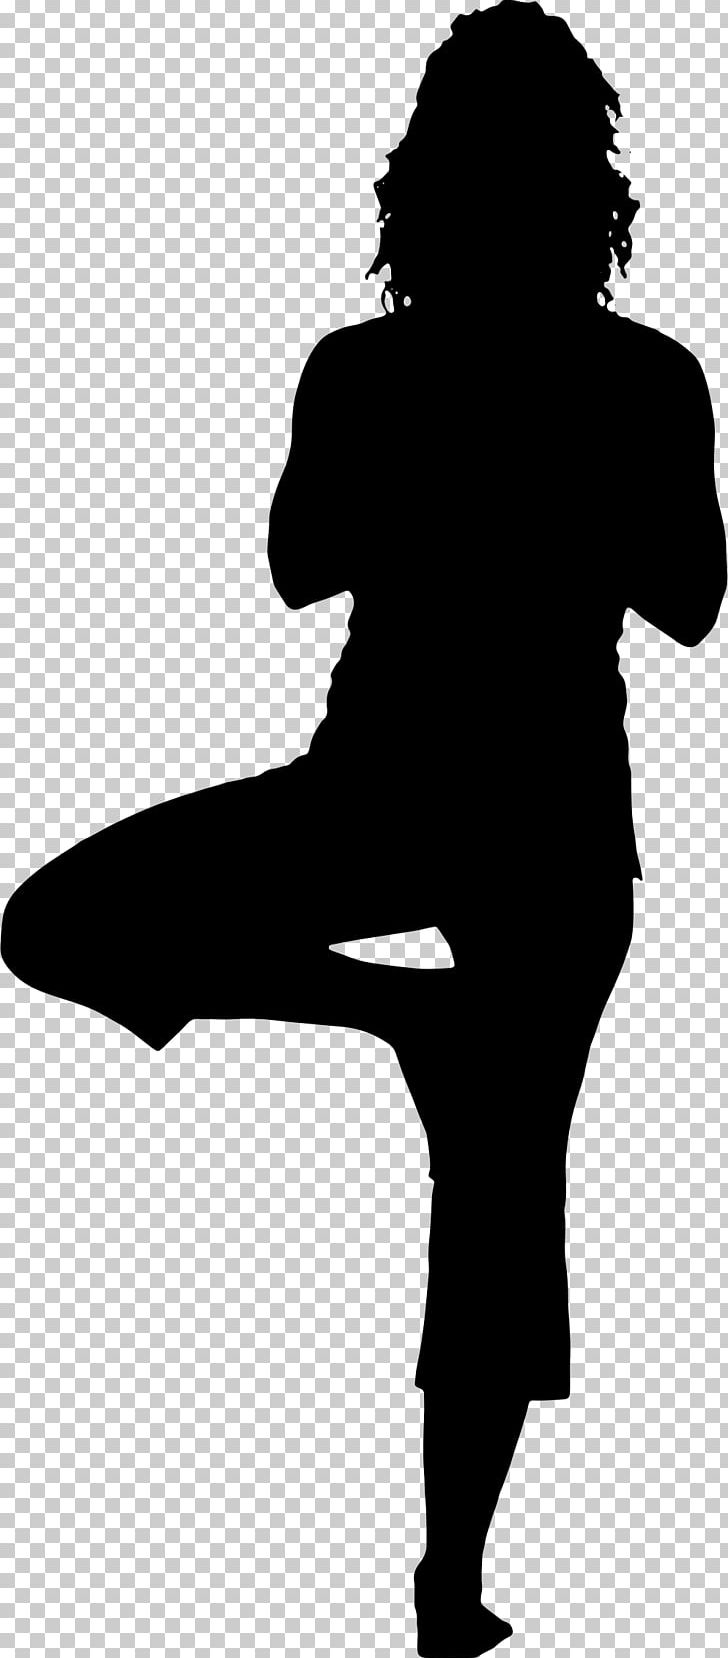 Yoga Silhouette Lotus Position Woman PNG, Clipart, Black, Black And White, Female, Joint, Lotus Position Free PNG Download